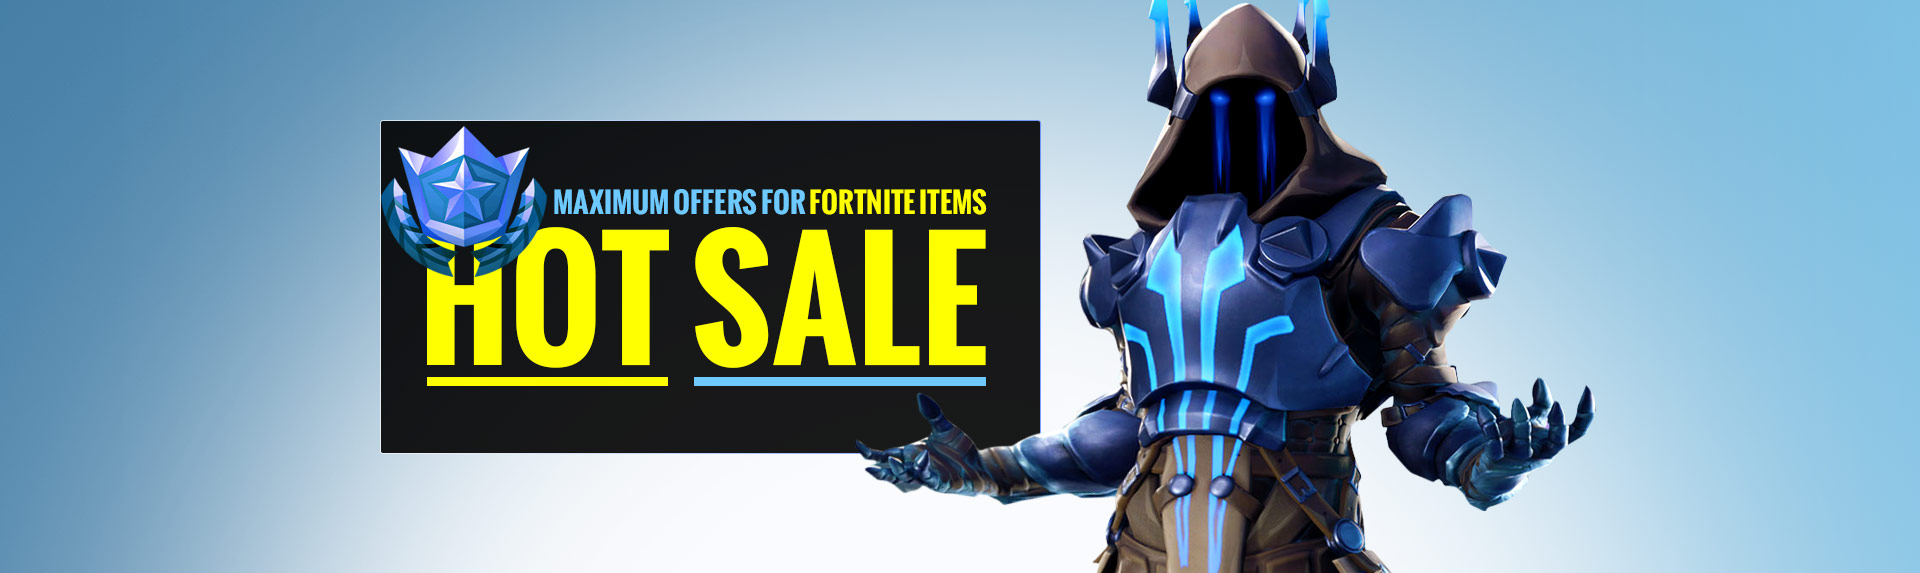 Cheap Fortnite Items Available,Hot Sale